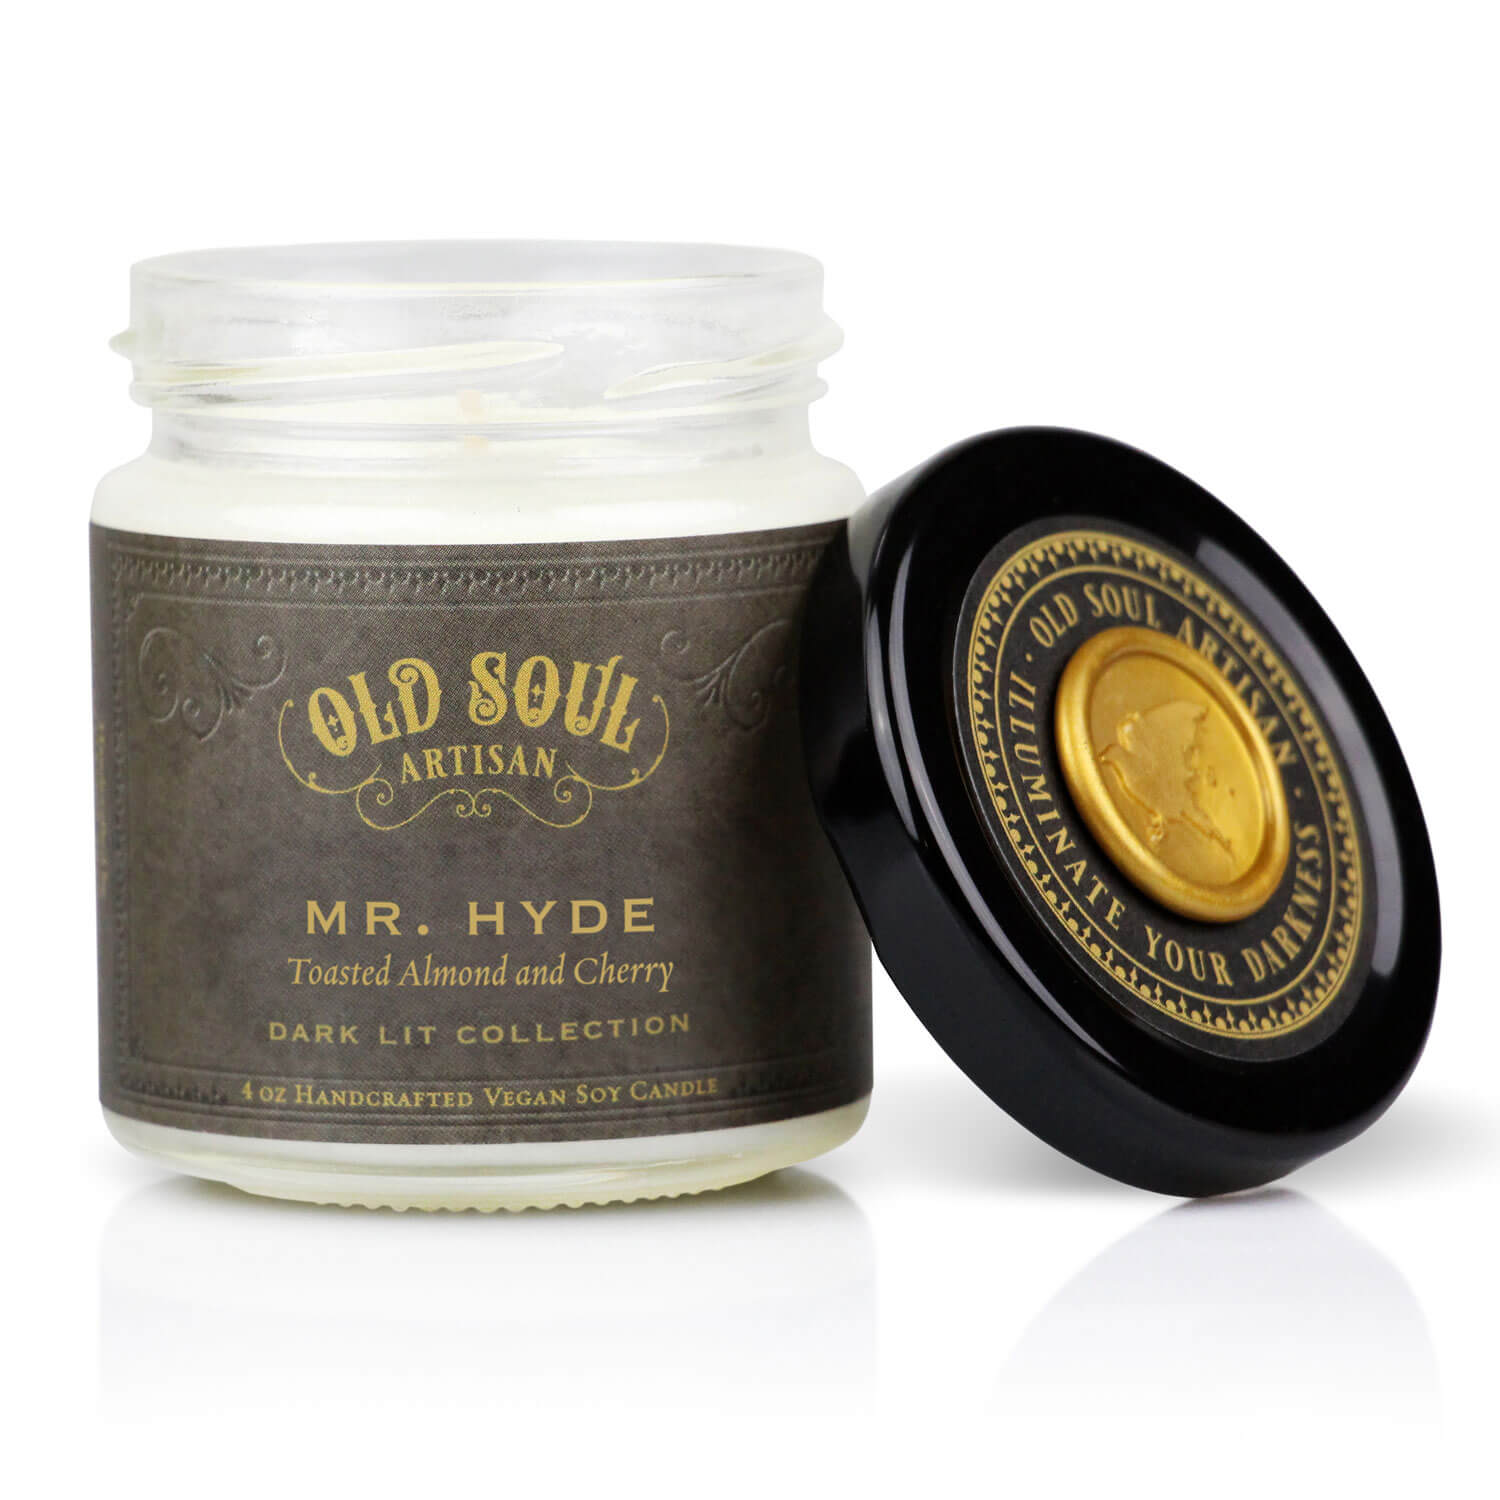 Mr. Hyde Soy Candle (toasted almond and cherry)